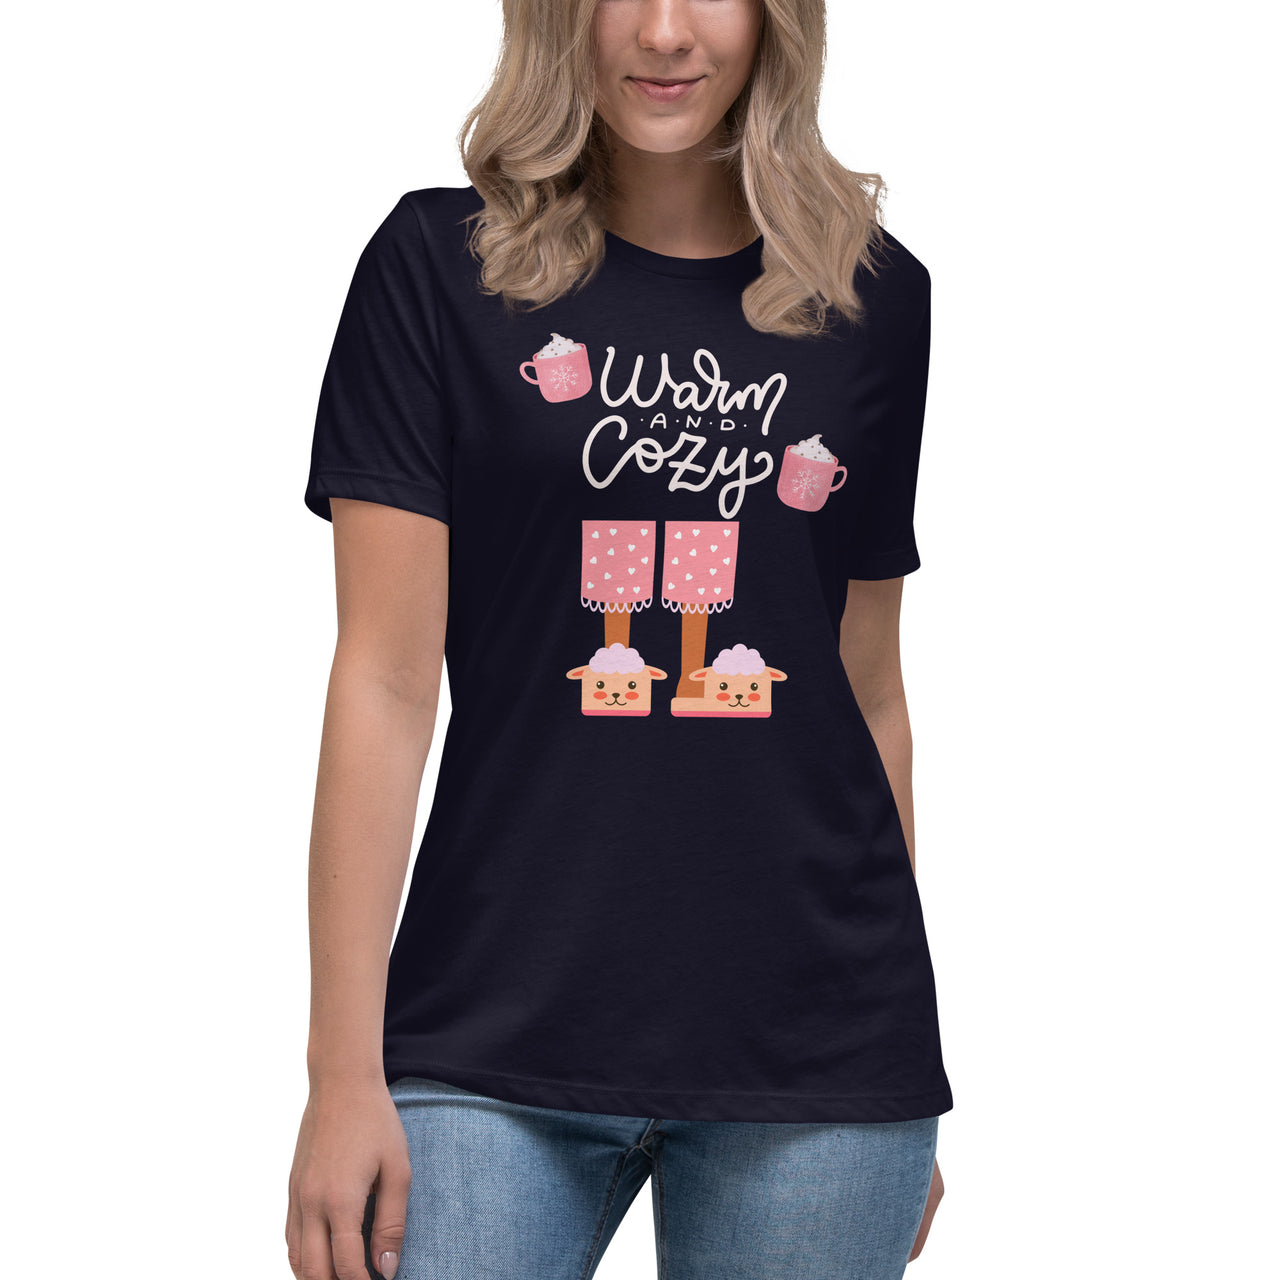 Warm And Cozy Fuzzy Slippers And Hot Chocolate Winter Holiday Tshirt